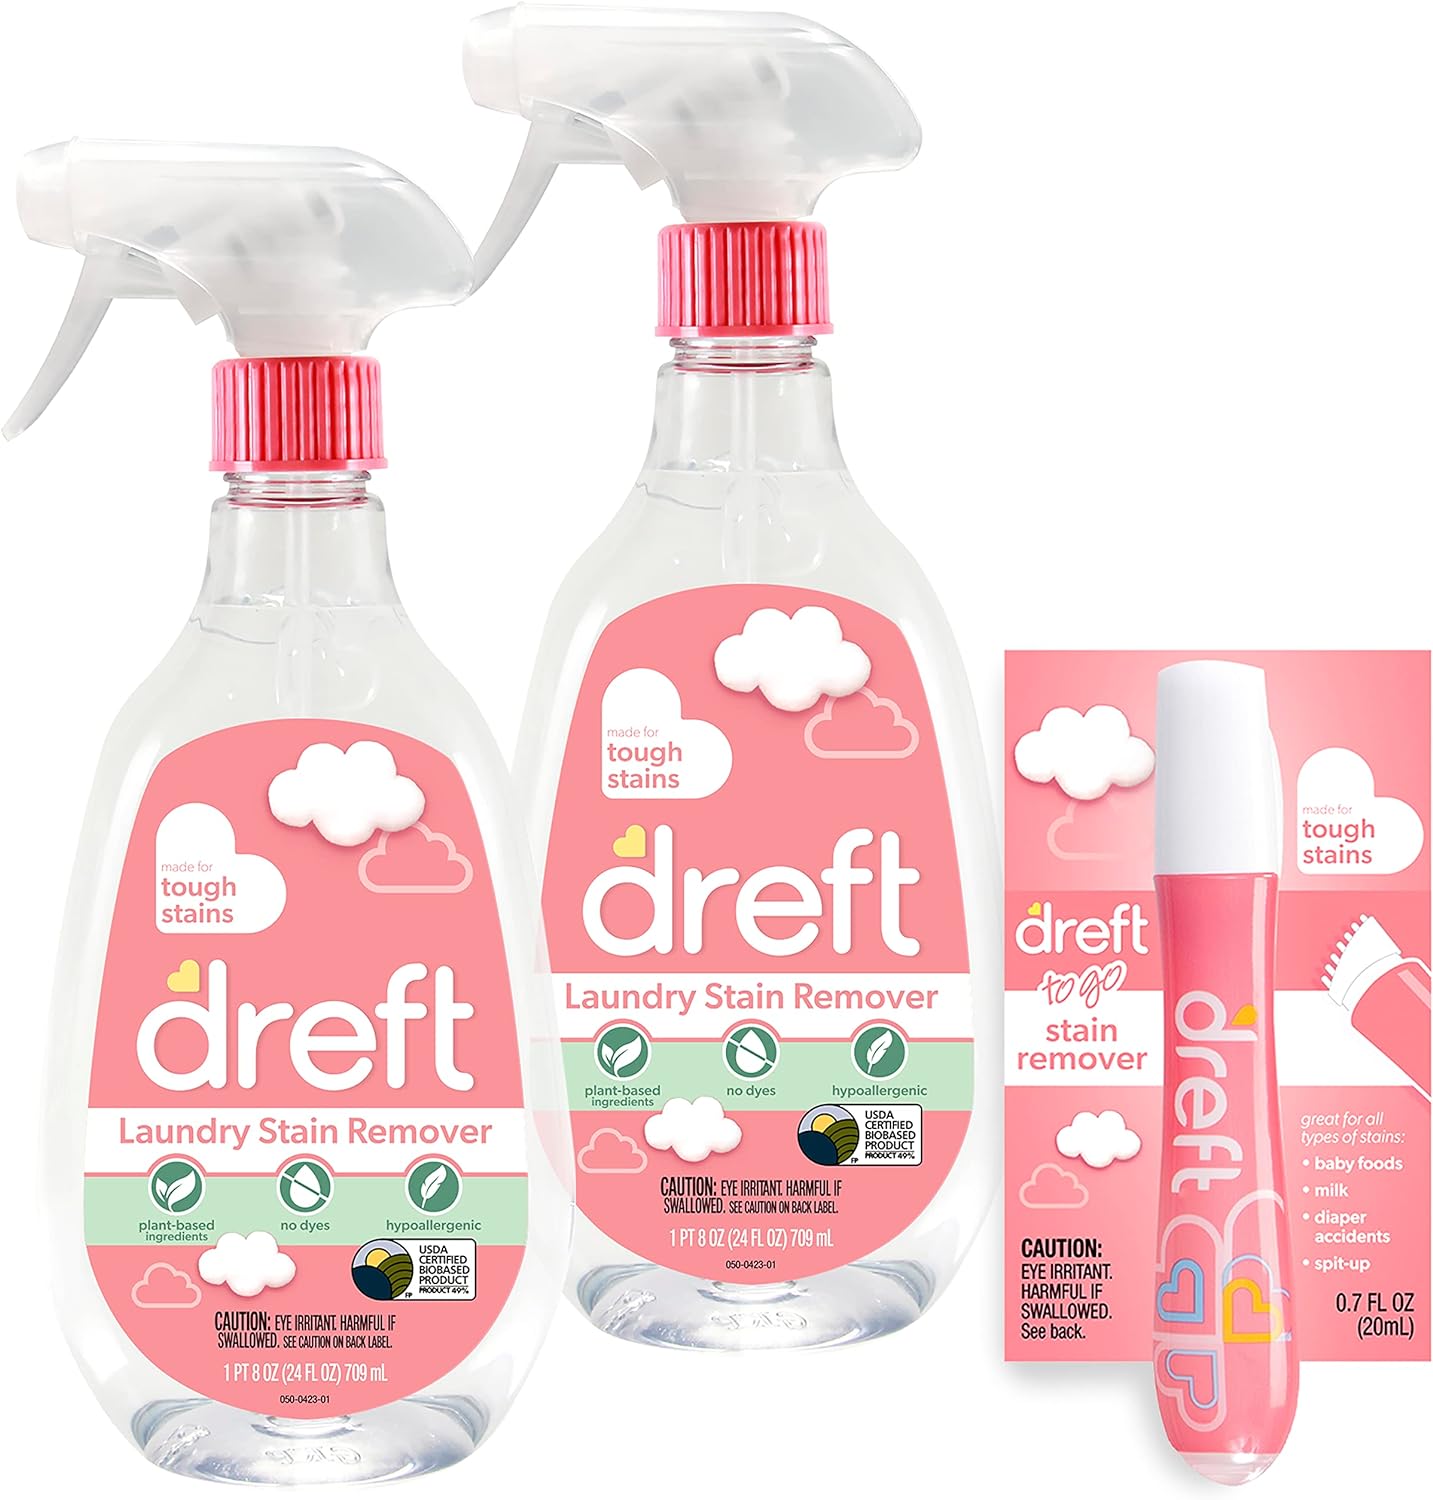 Dreft Stain Remover for Baby Clothes, Fragrance Free and Hypoallergenic Baby Stain Remover Spray Plus Travel Size Stain Treater Pen, 24 Fl Oz ( Pack of 2 + Stain Pen)